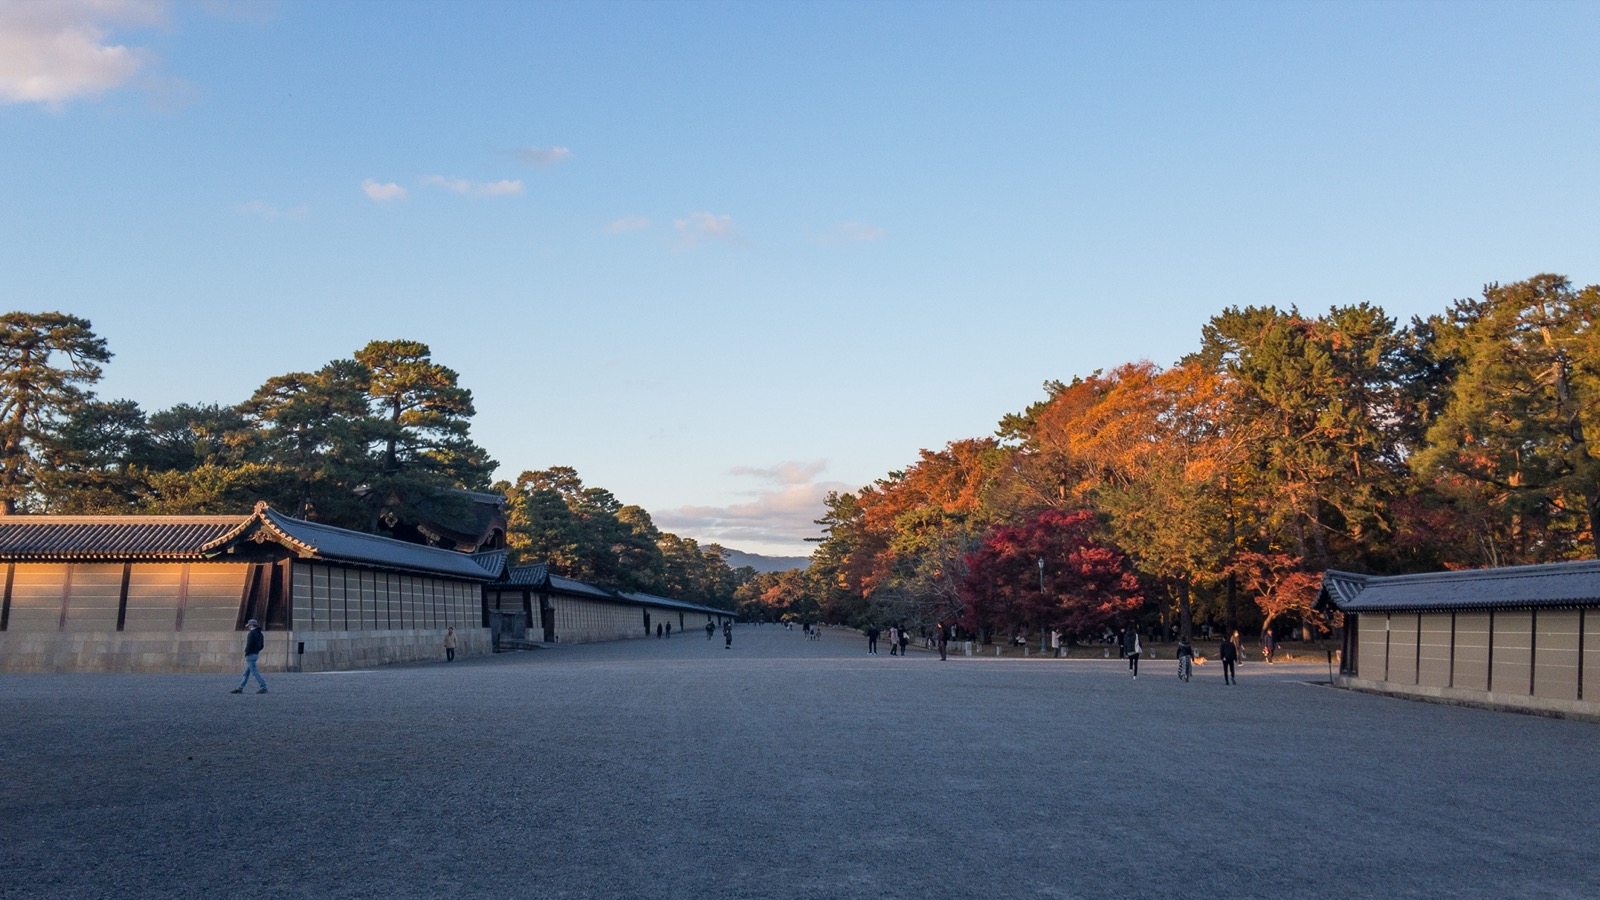 Photo of Imperial Palace Area, Japan (At Kyoto Imperial Place Park by Daniel Ramirez)